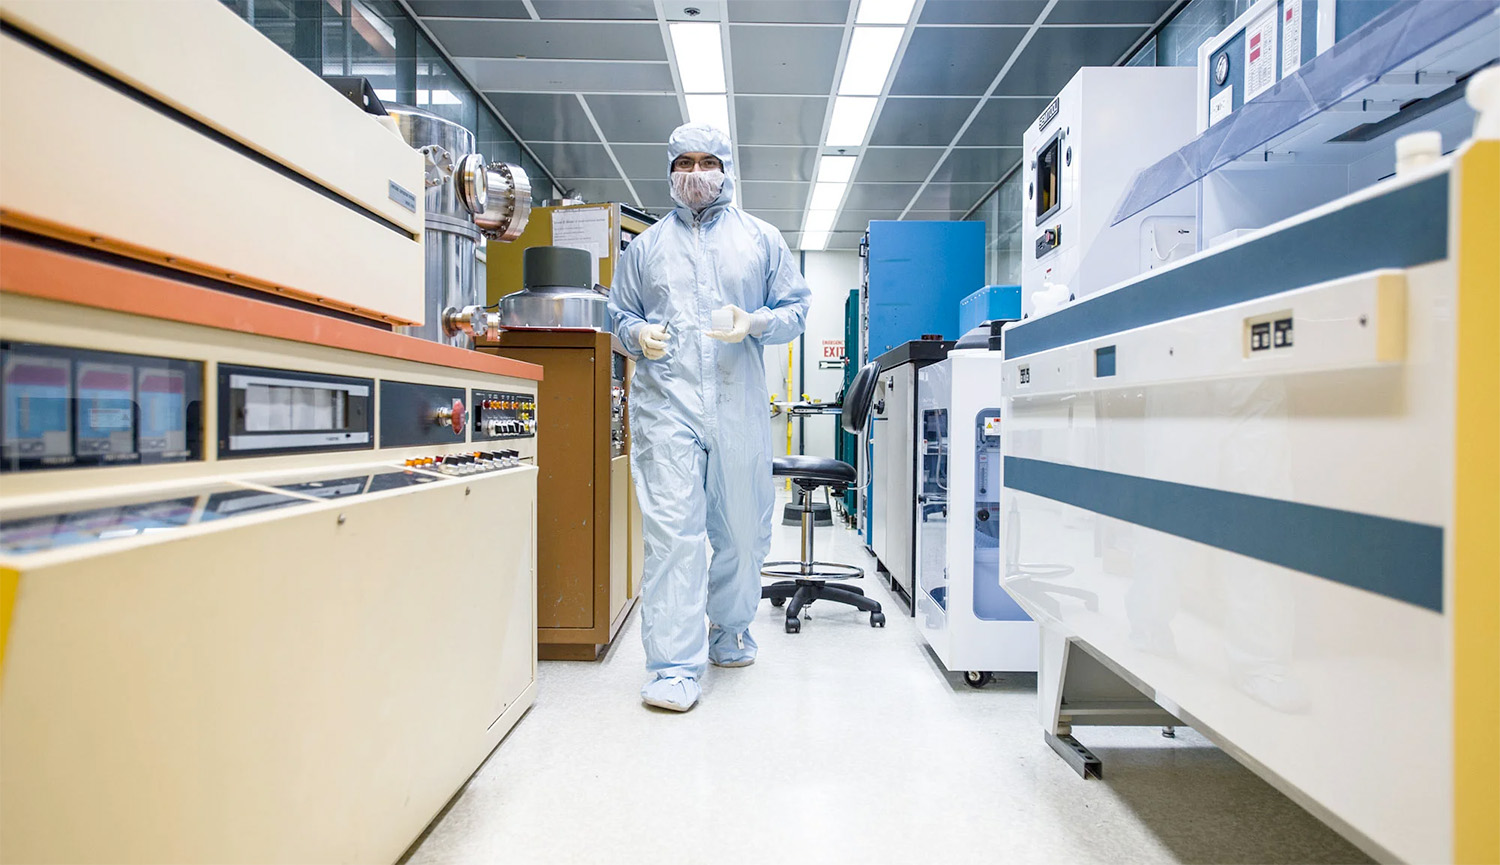 Student in clean room uniform walking through facility